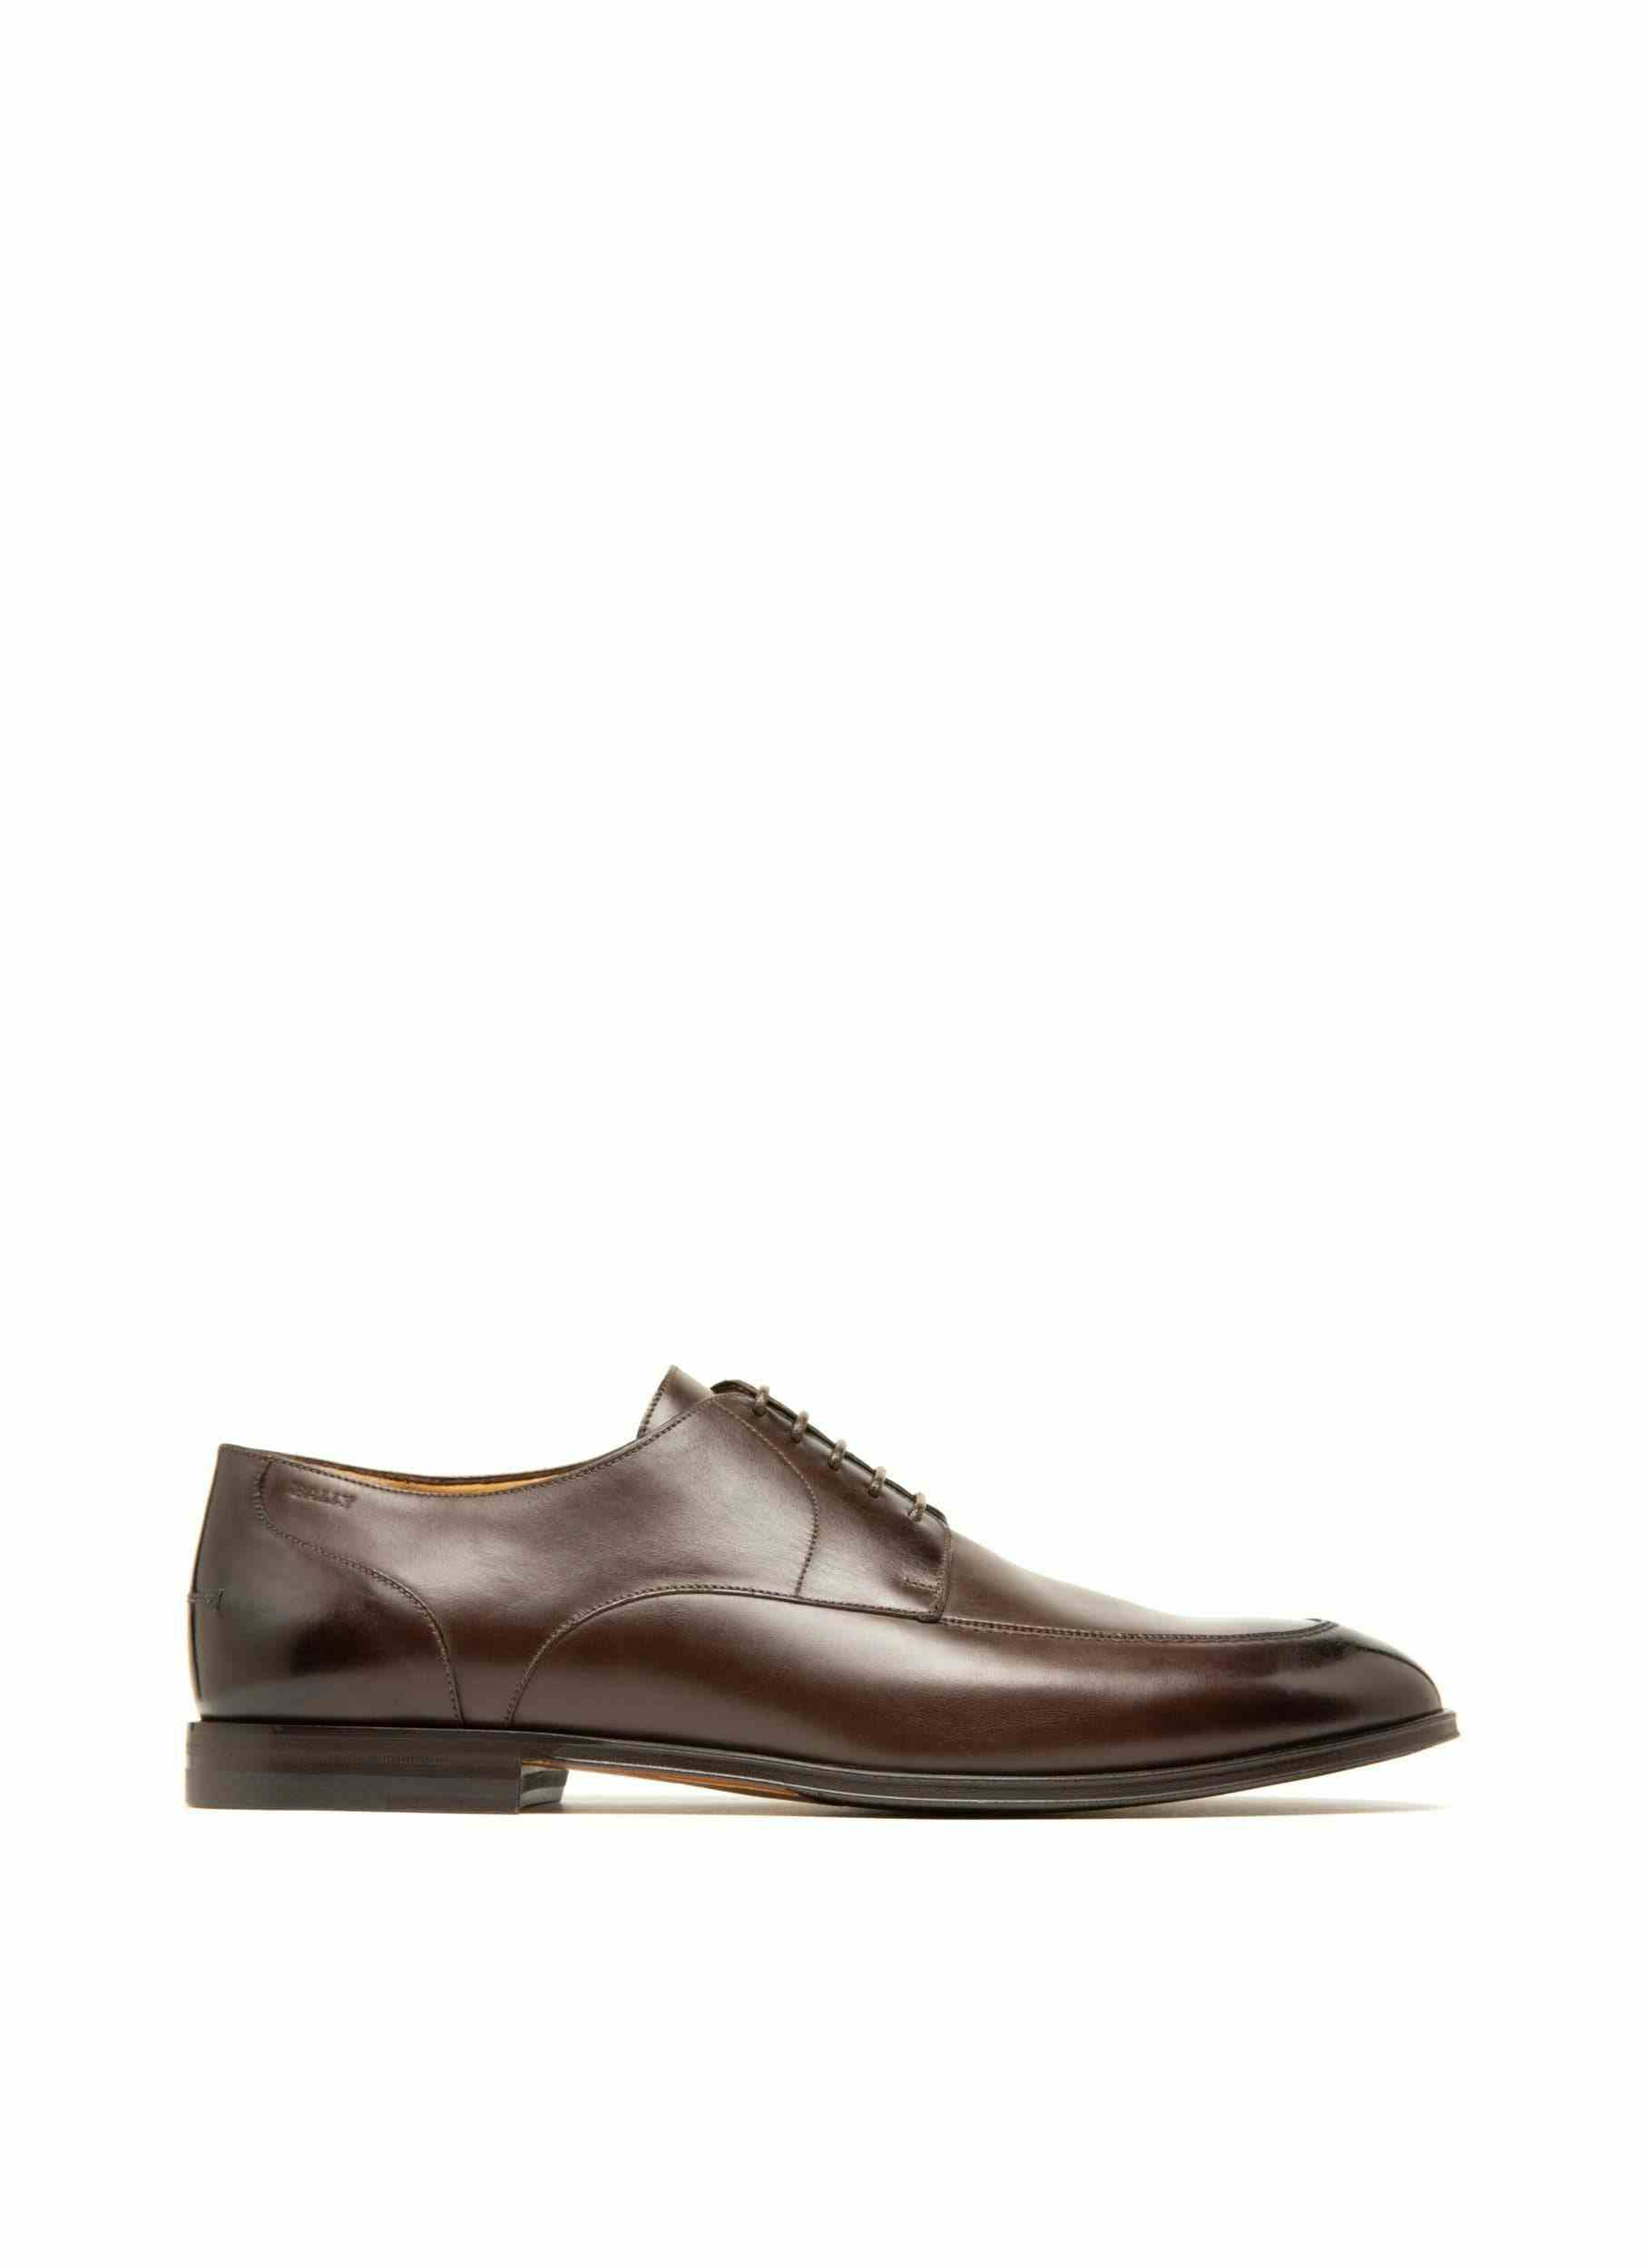 Wedmer Leather Derby Shoes In Brown - Men's - Bally